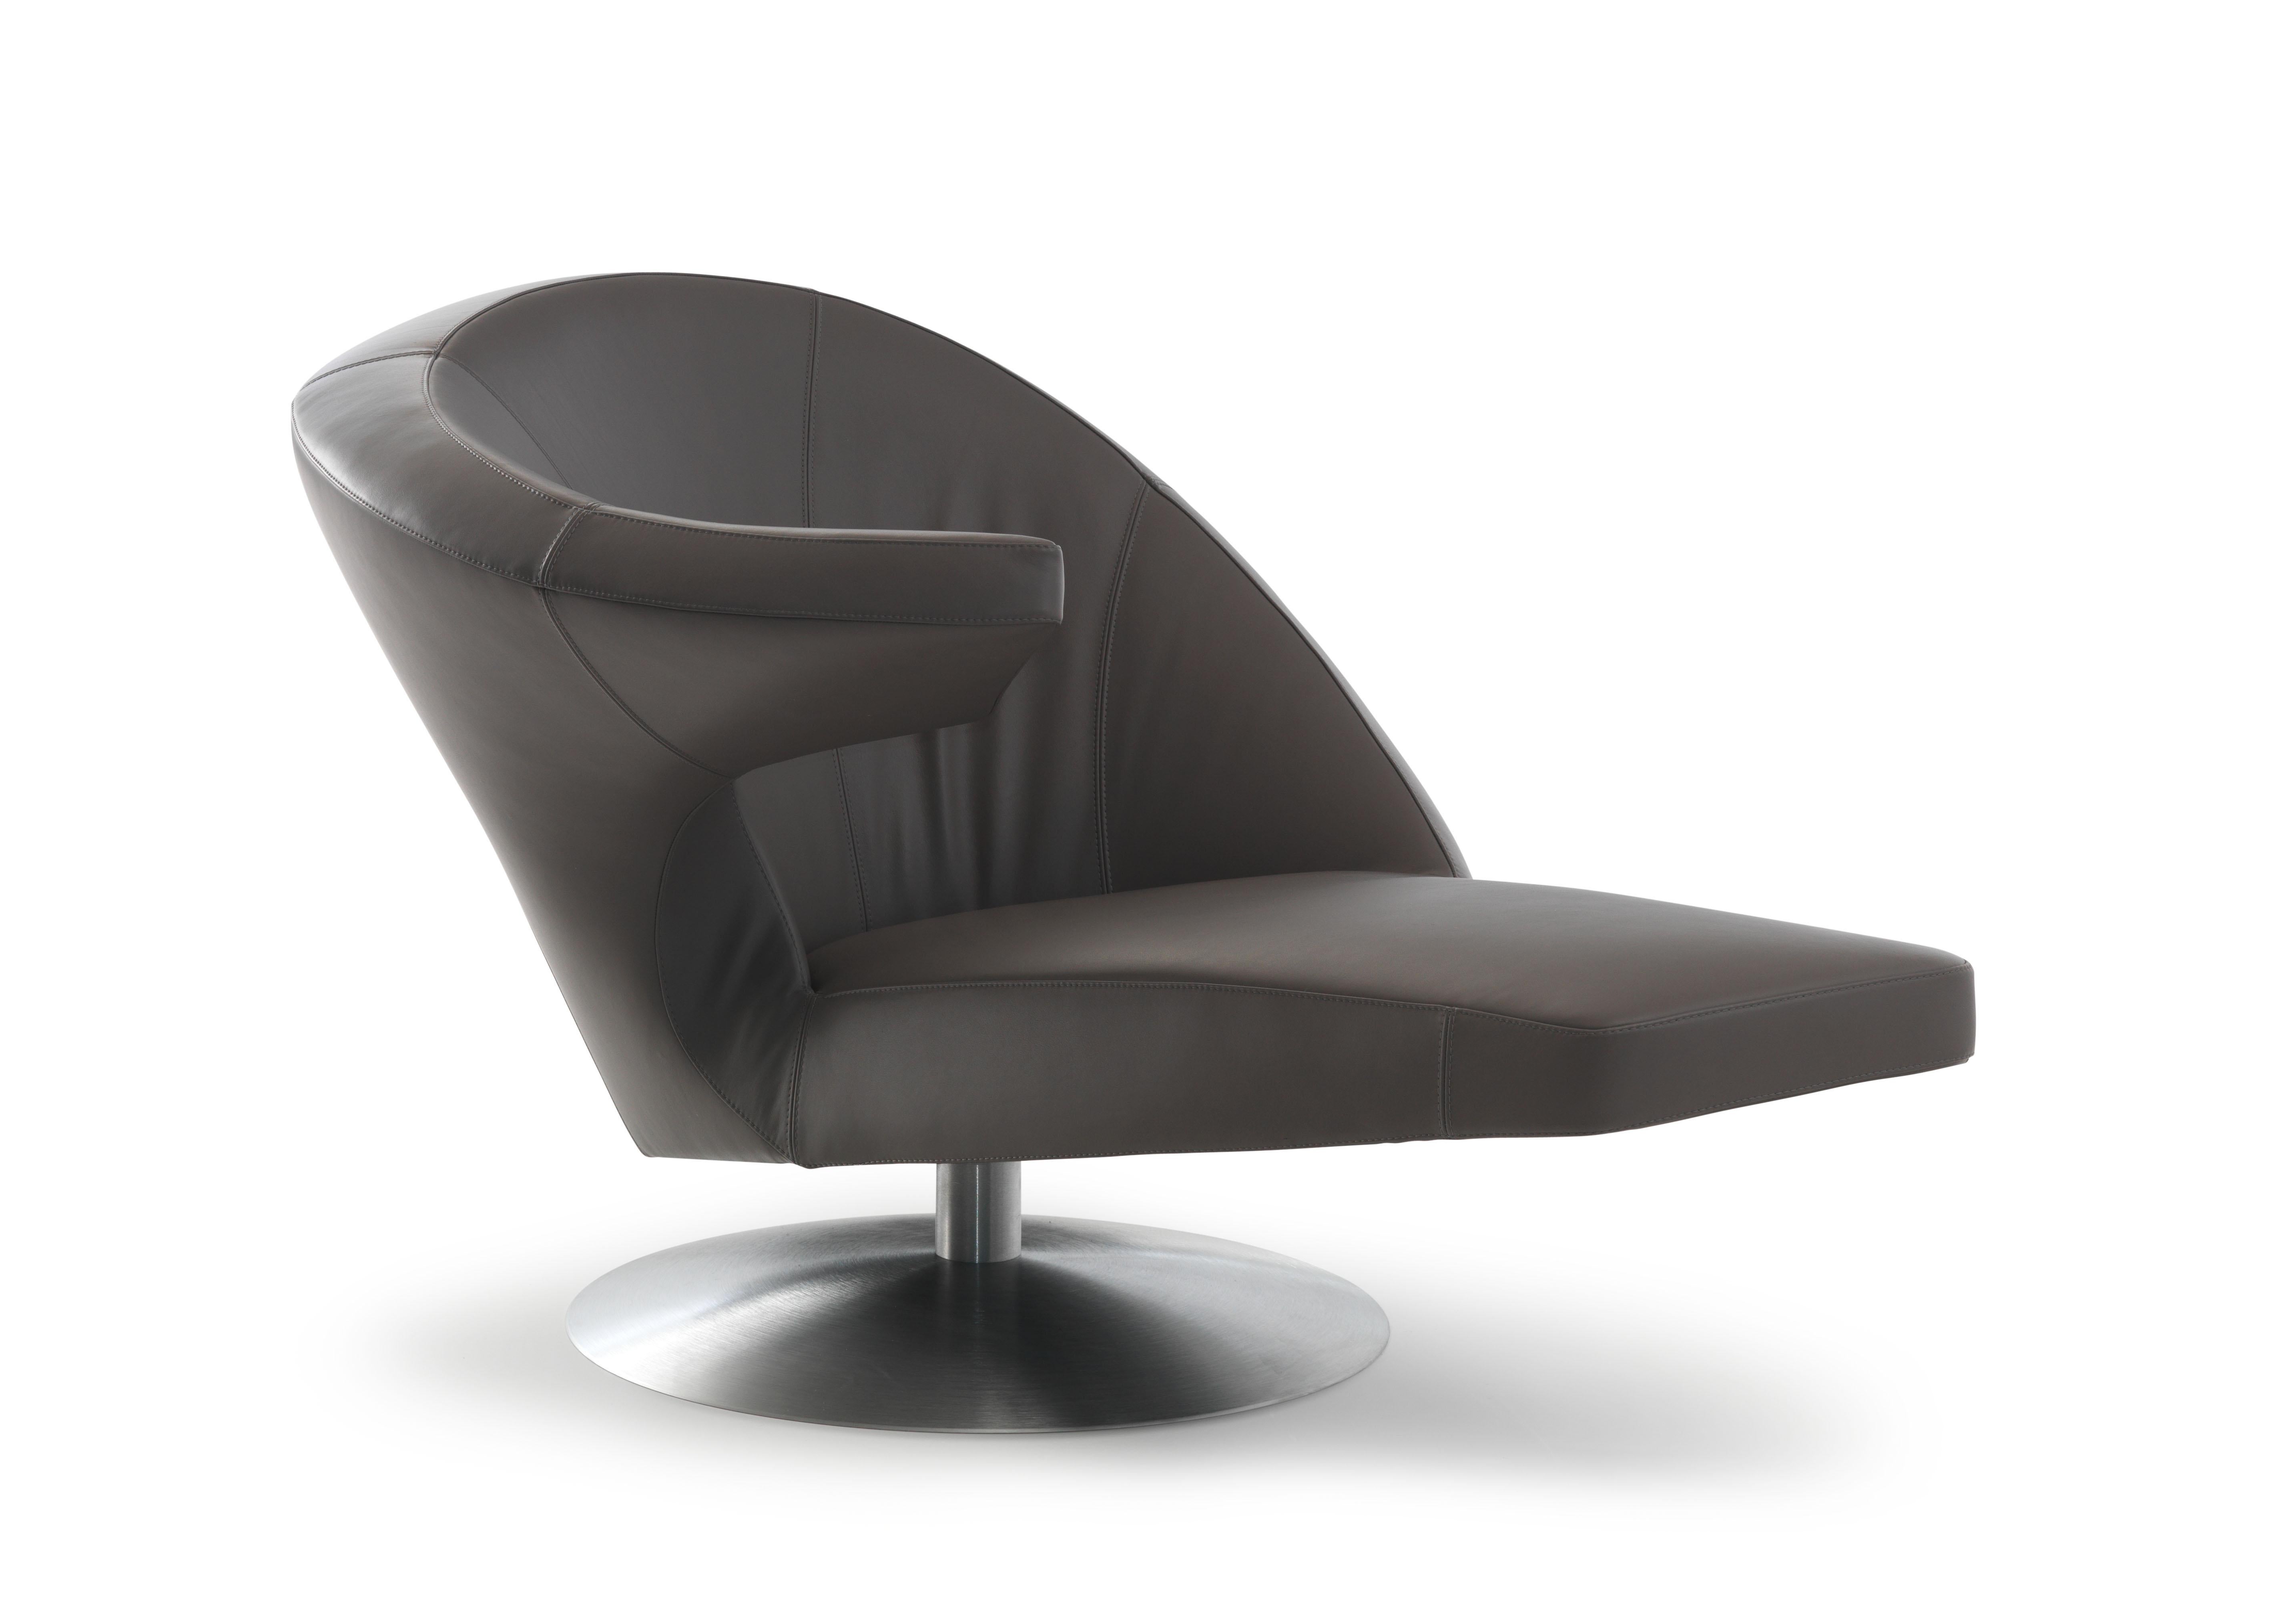 One curl on paper, countless functions. 

Its powerful design makes the Parabolica swivel armchair a fantastic object in your living room. The asymmetric form allows at least three user experiences: sitting “normally”, laid back relaxed or sitting